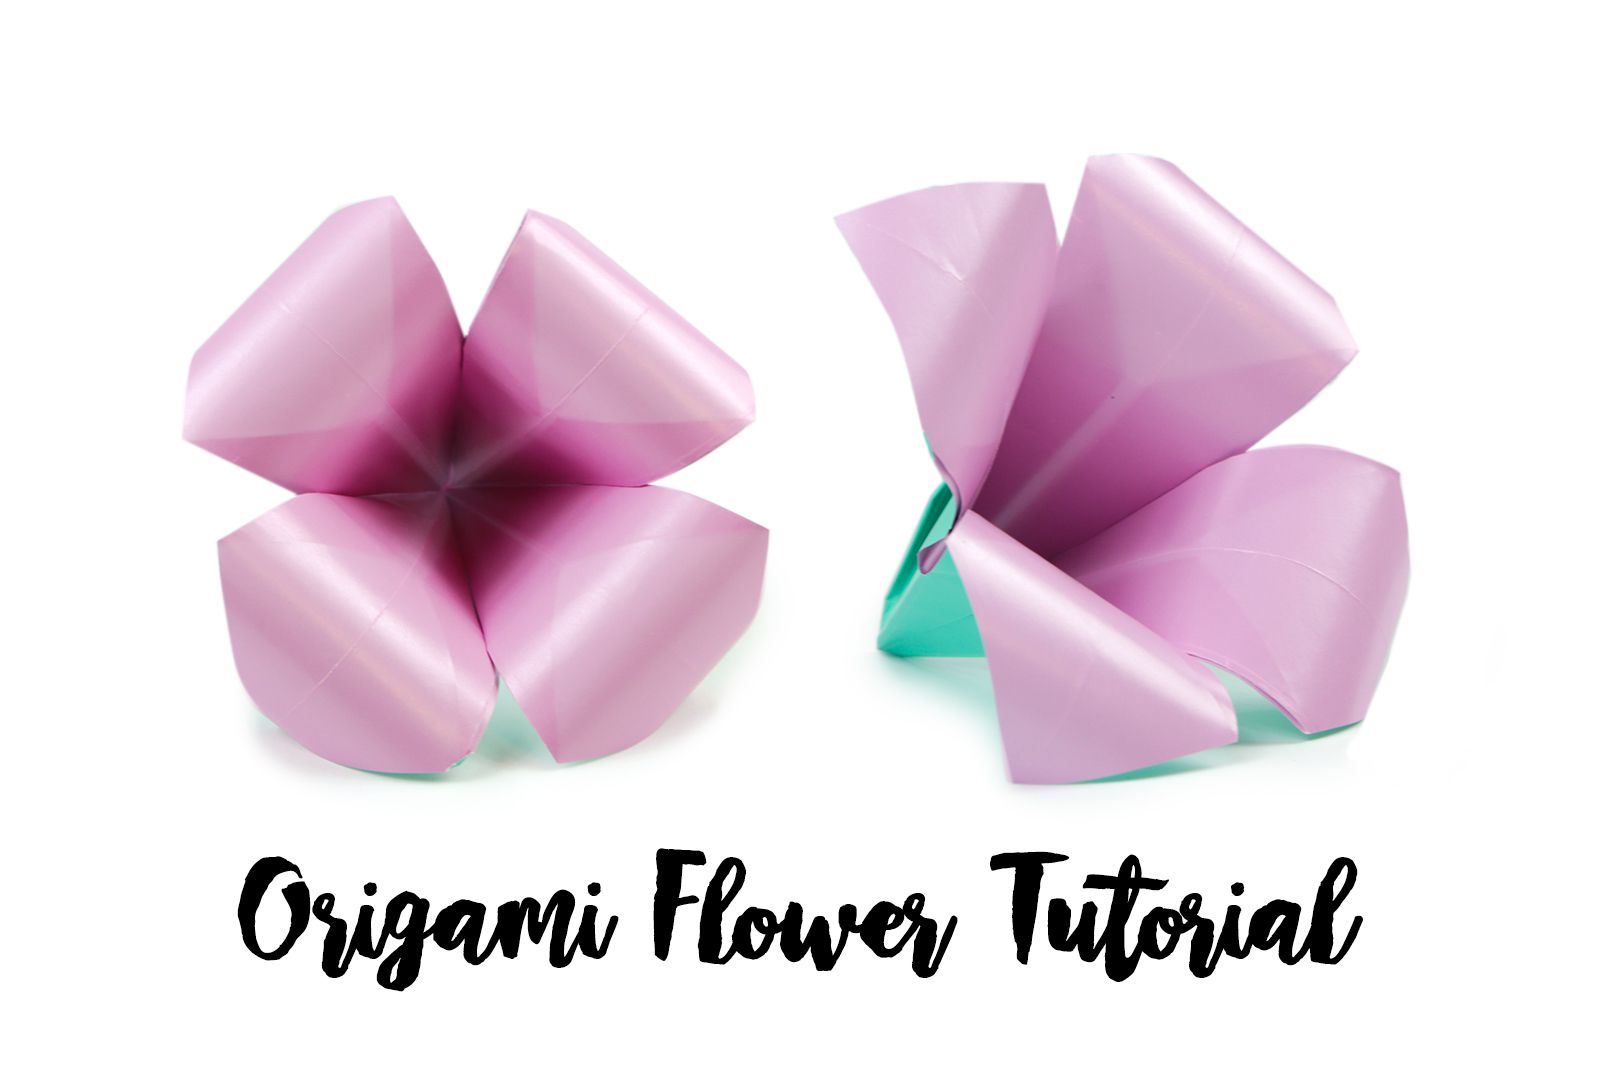 How To Make An Origami Rose Easy Make An Easy Origami Lily Flower